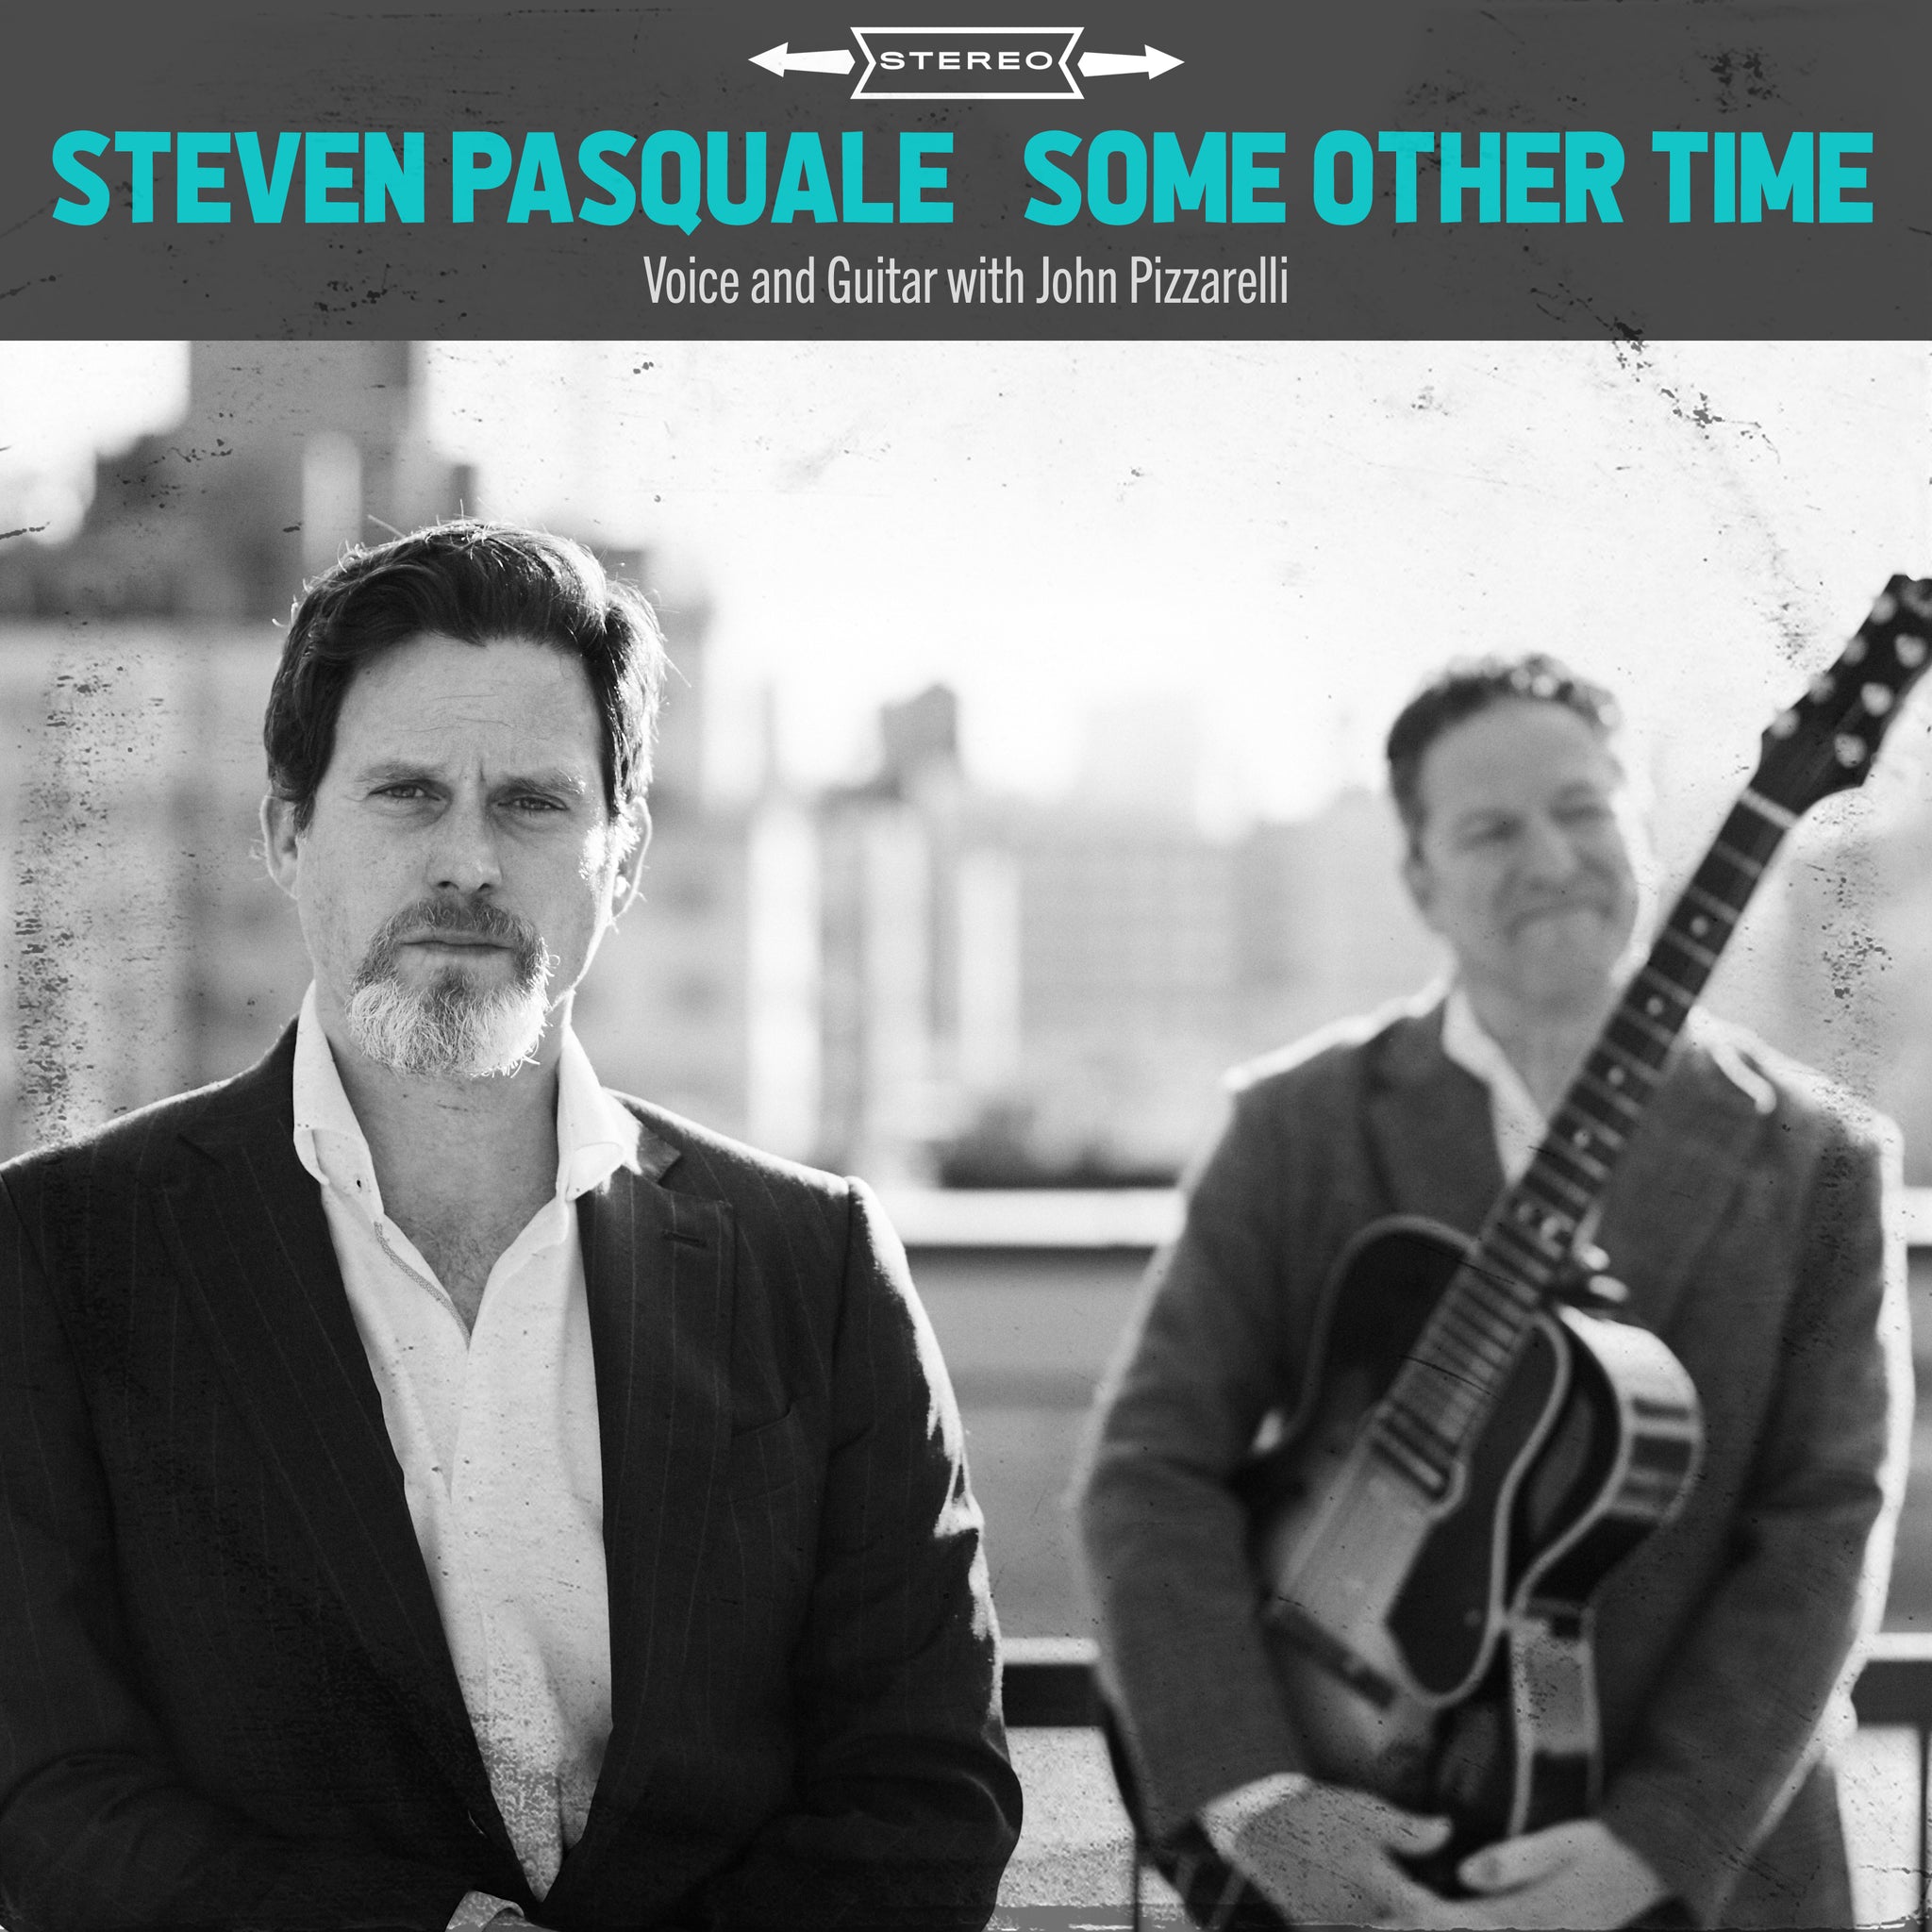 Steven Pasquale: Some Other Time [MP3]